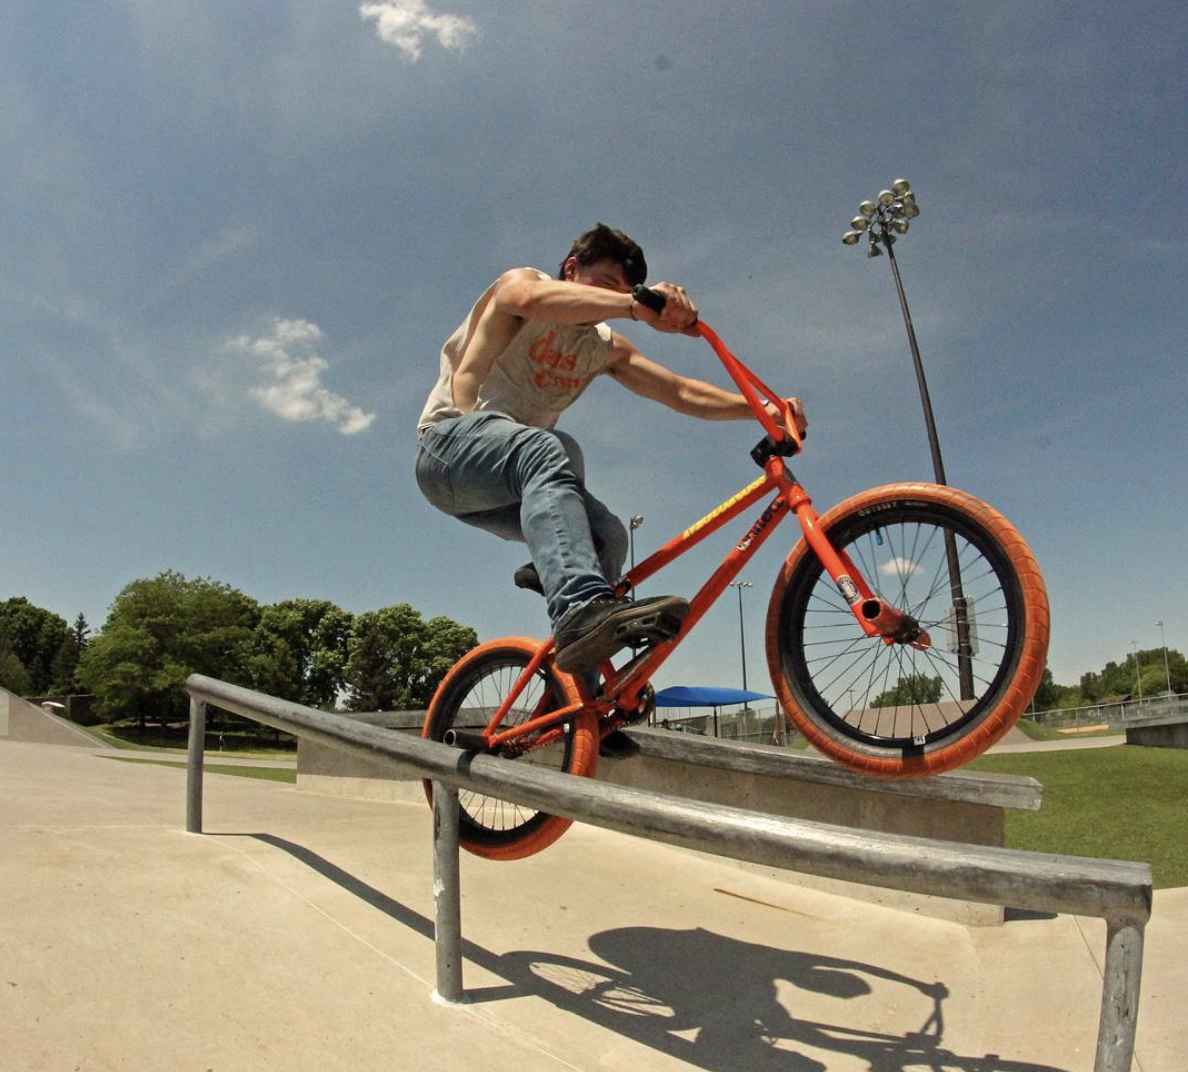 Person riding an orange BMX bike balances on the right rear axle peg down a steel rail at a rec park on a sunny day